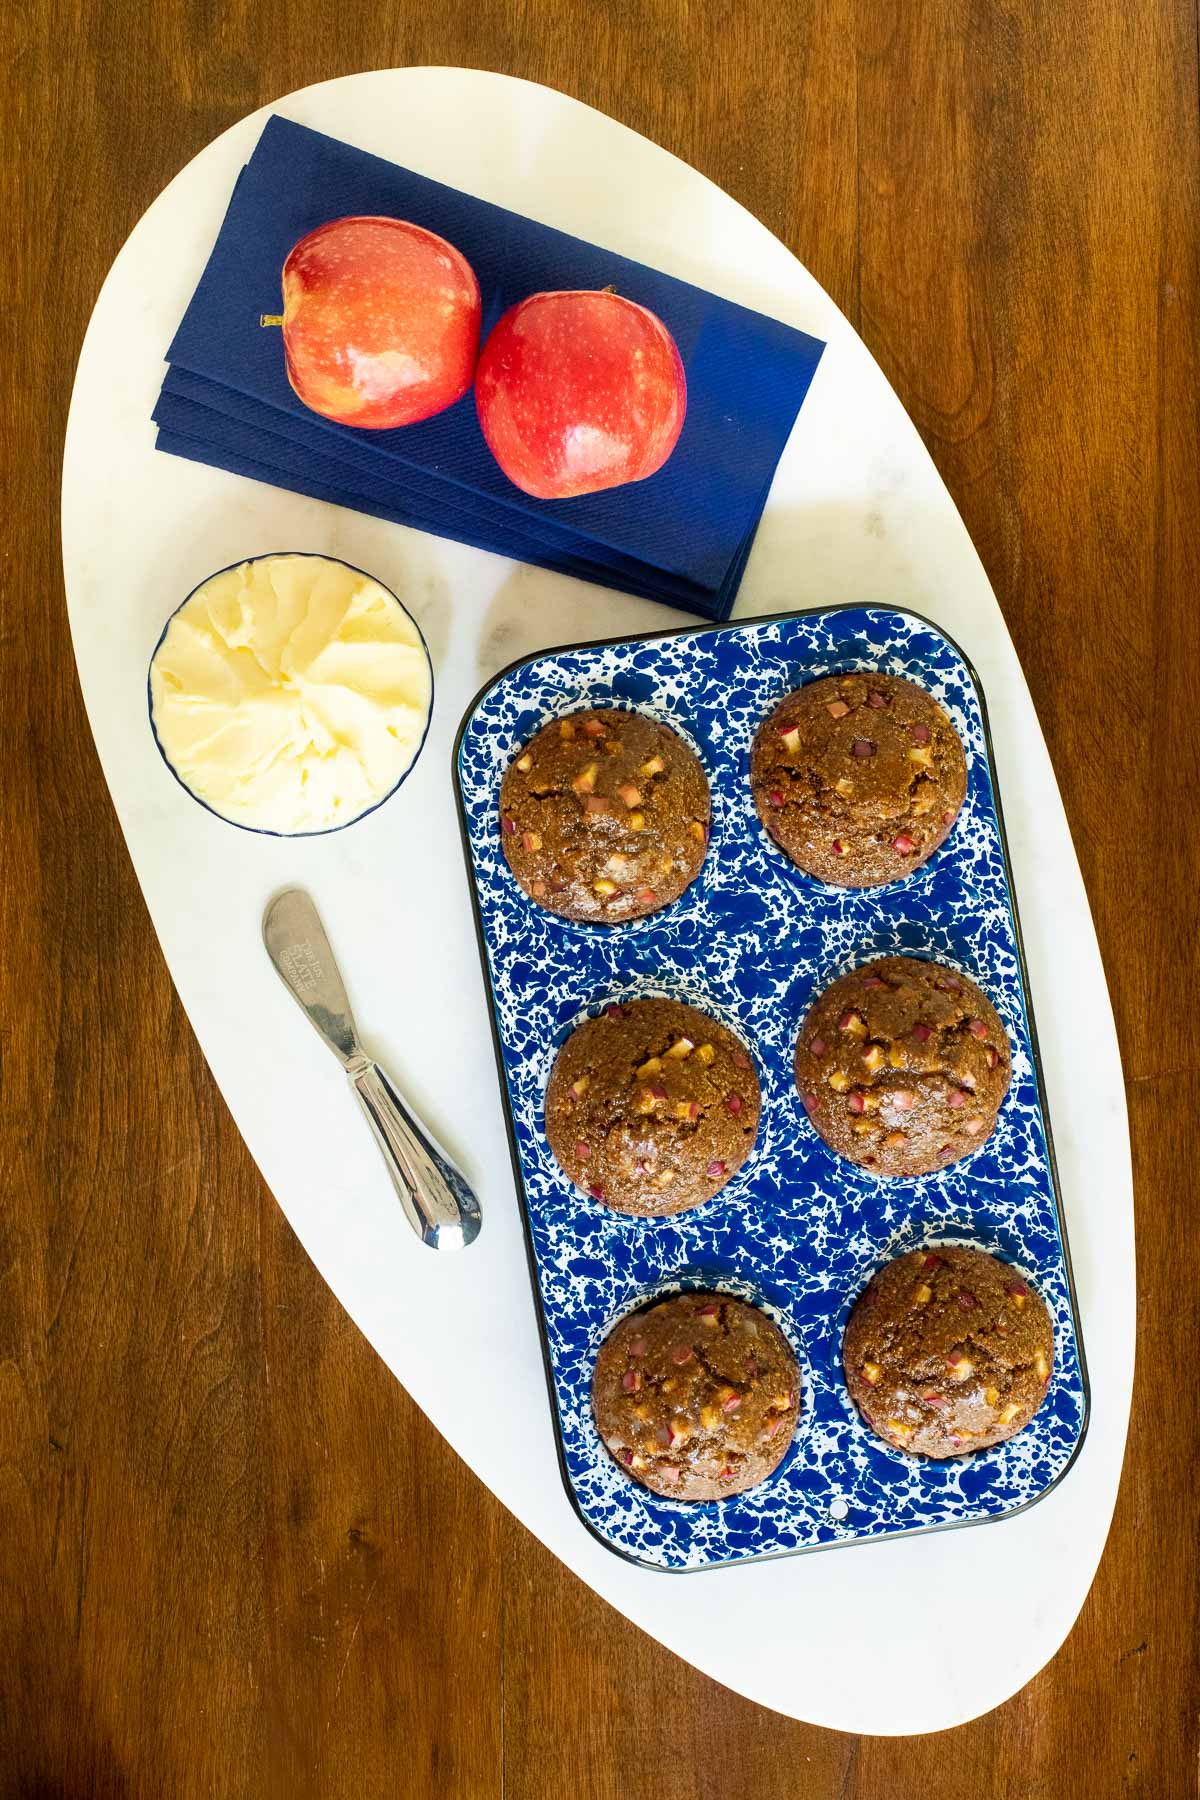 Vertical overhead photo of Honey Glazed Apple Bran Muffins in a blue and white patterned muffin tray.